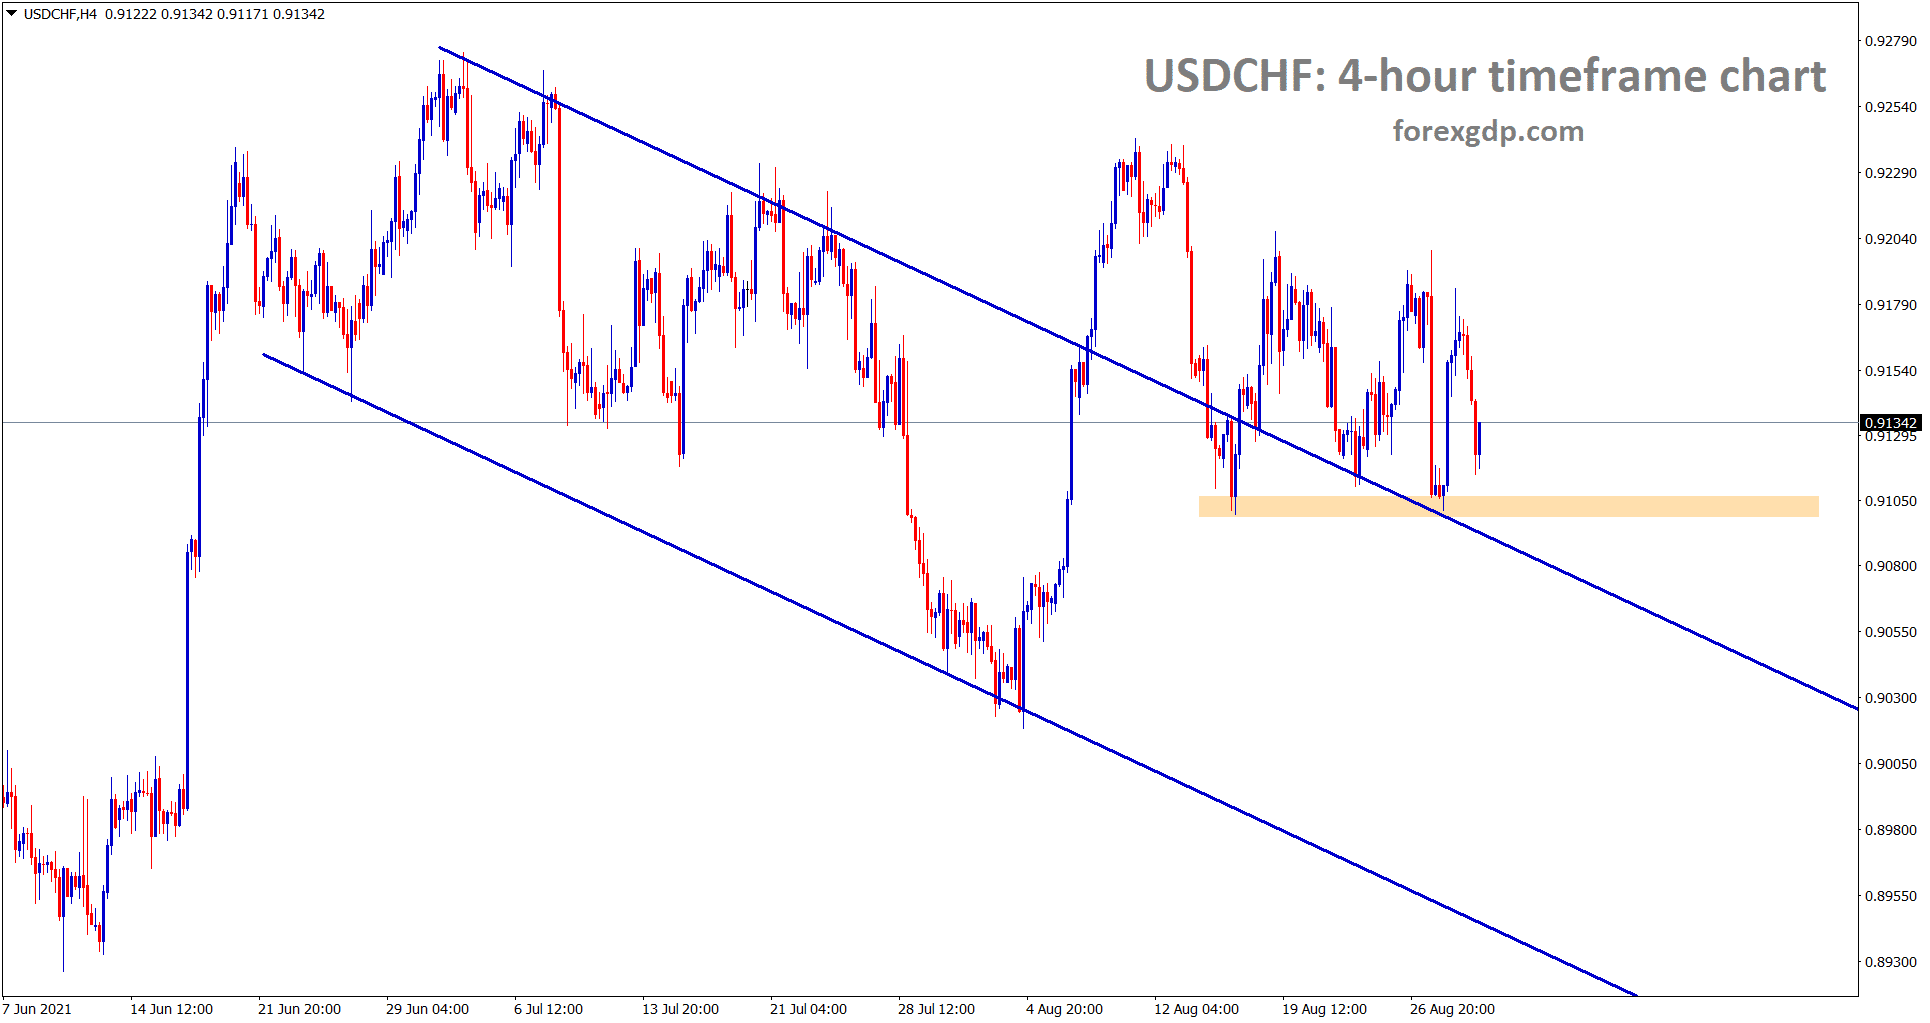 USDCHF bouncing back after retesting the broken descending channel and the horizontal support area